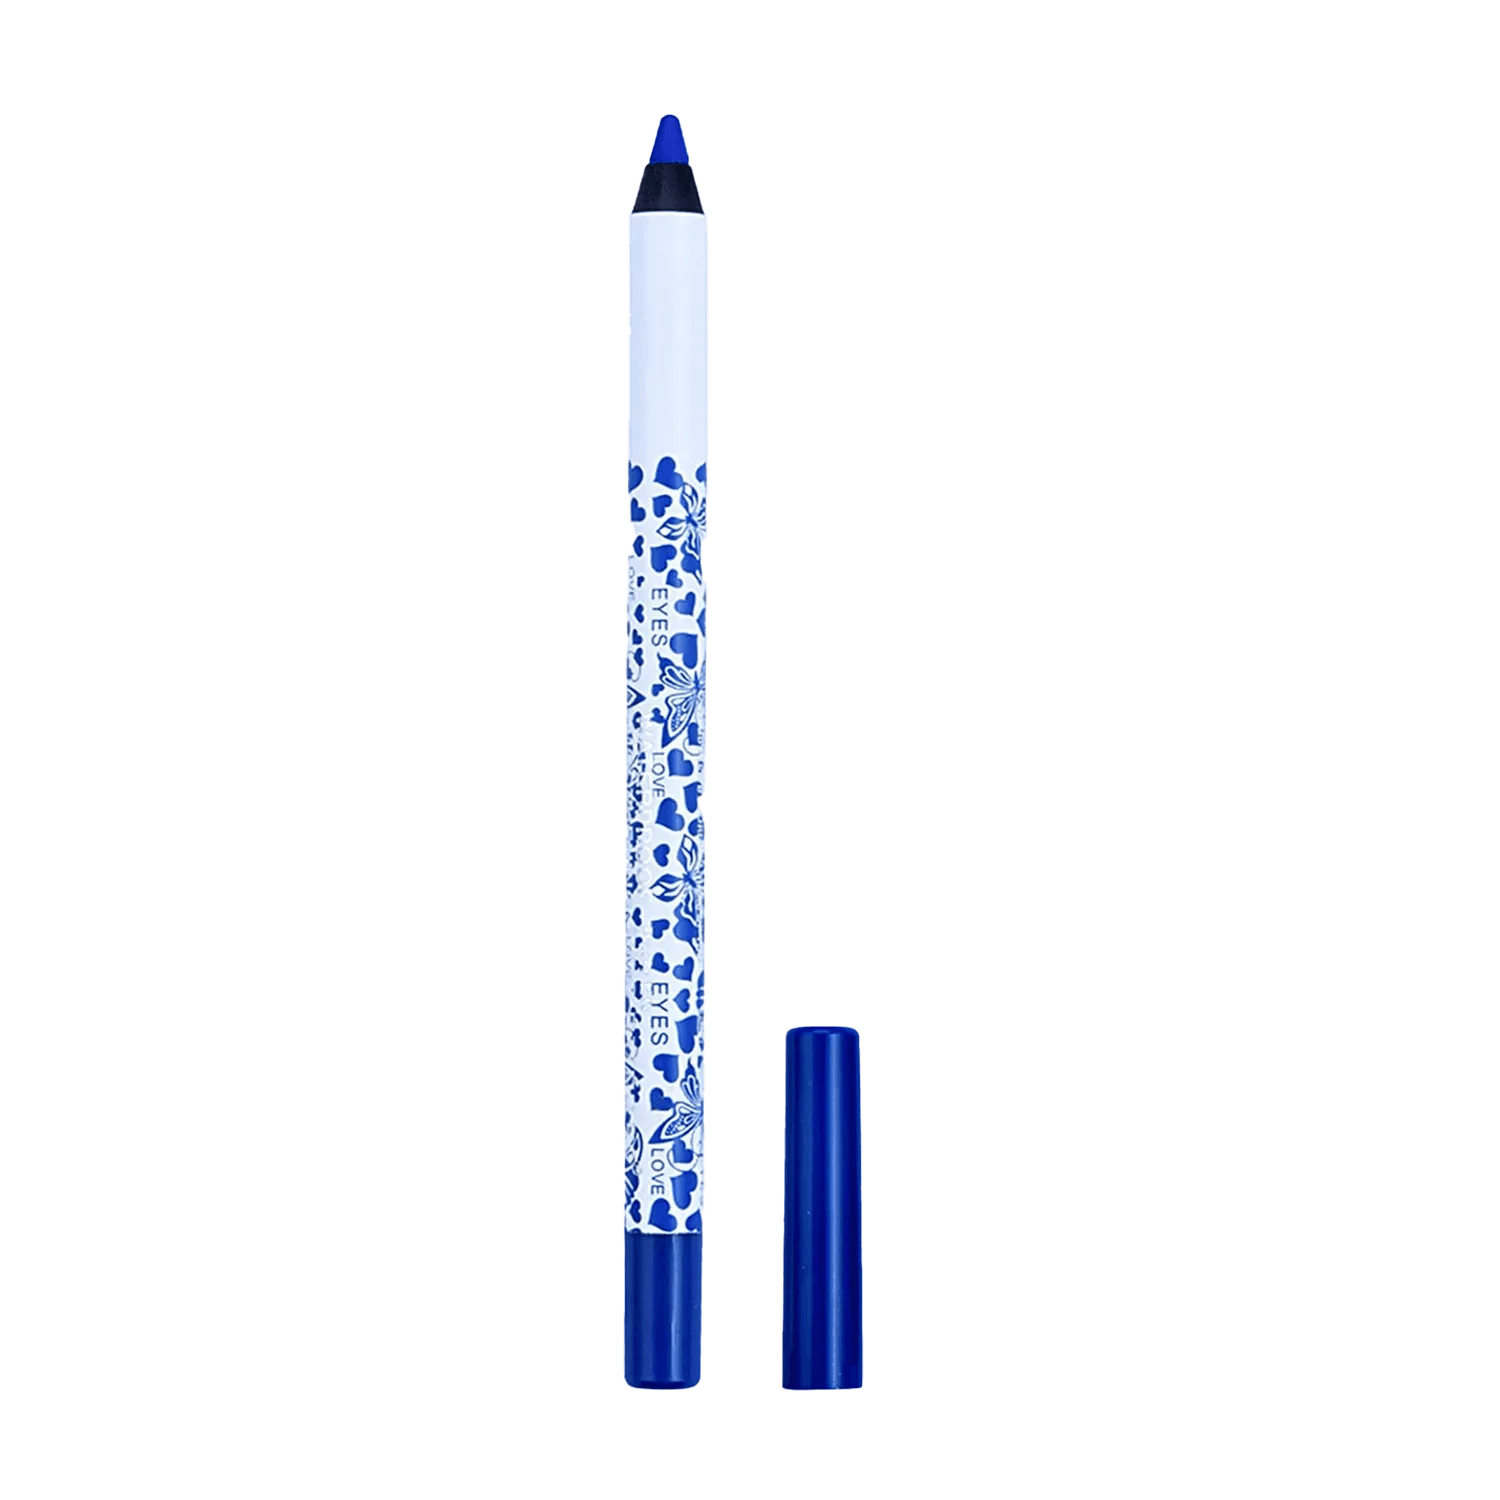 Daily Life Forever52 | Daily Life Forever52 Waterproof Smoothening Eye Pencil Flint F515 (1gm)